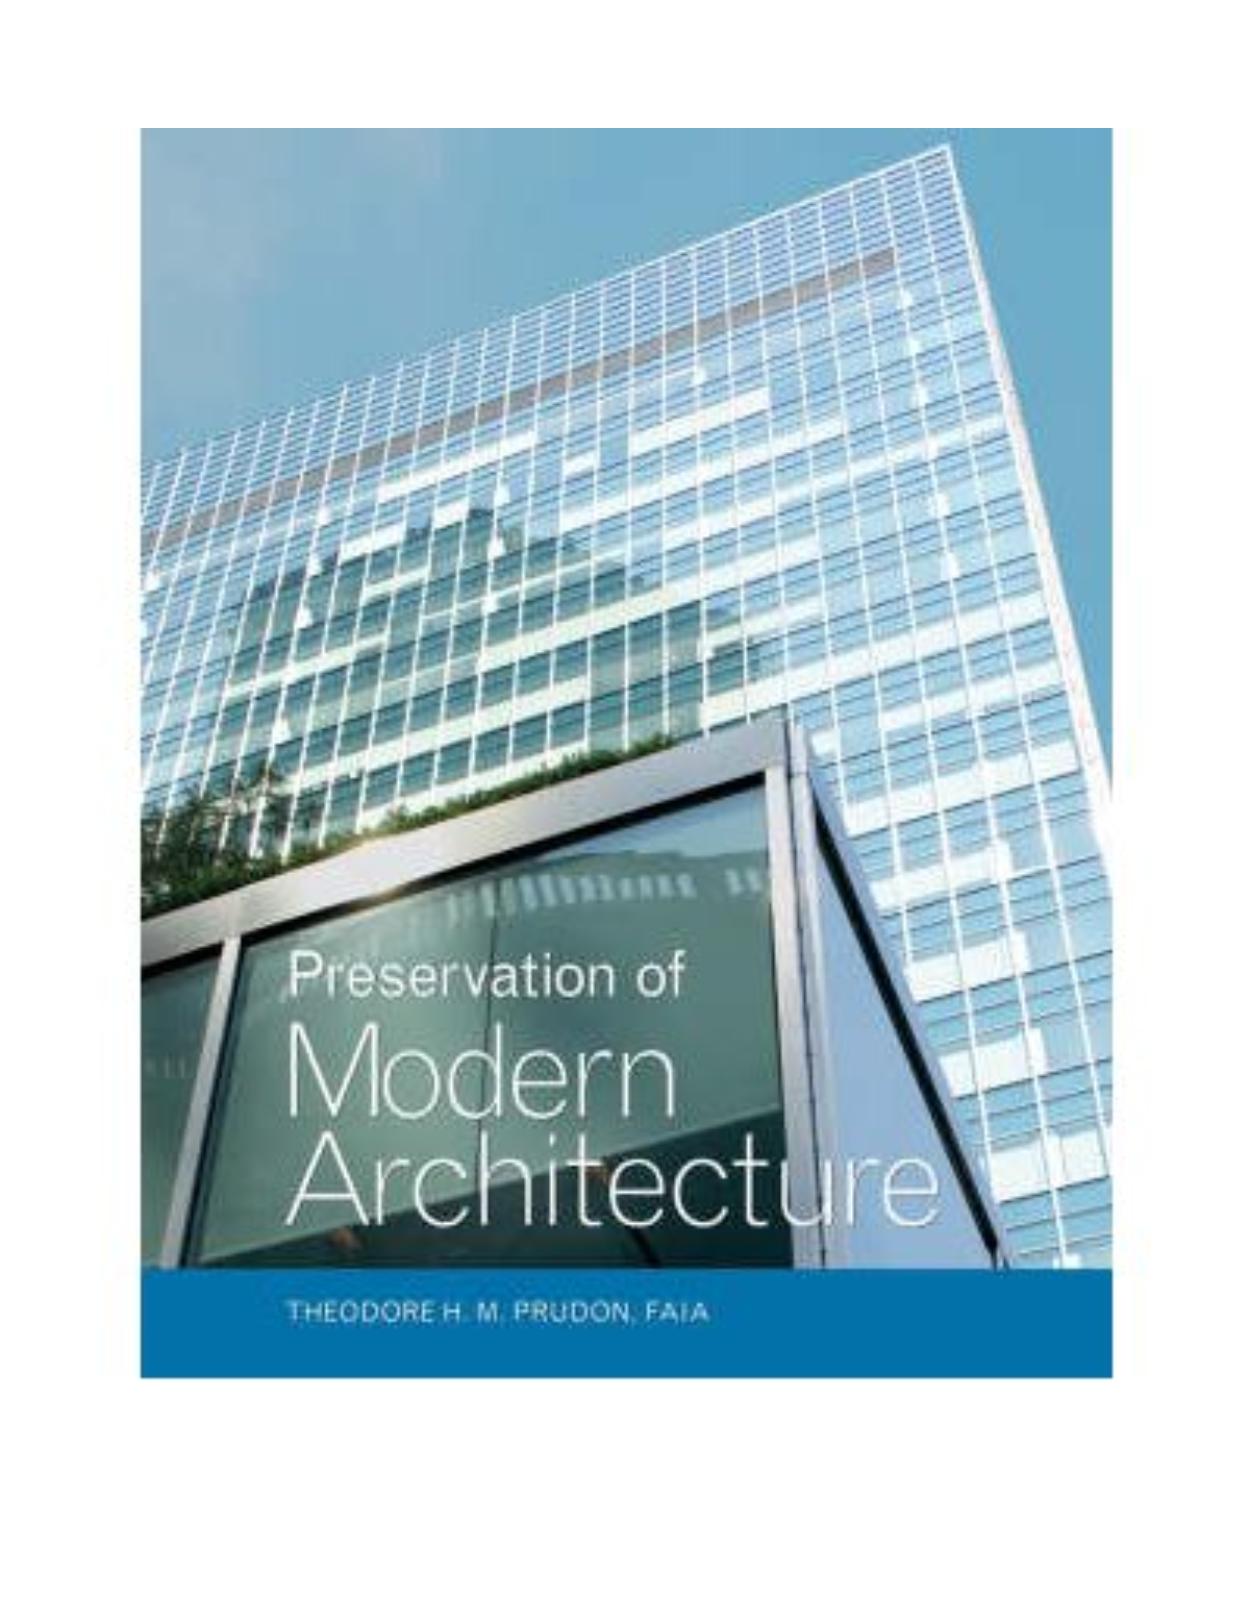 Preservation of Modern Architecture